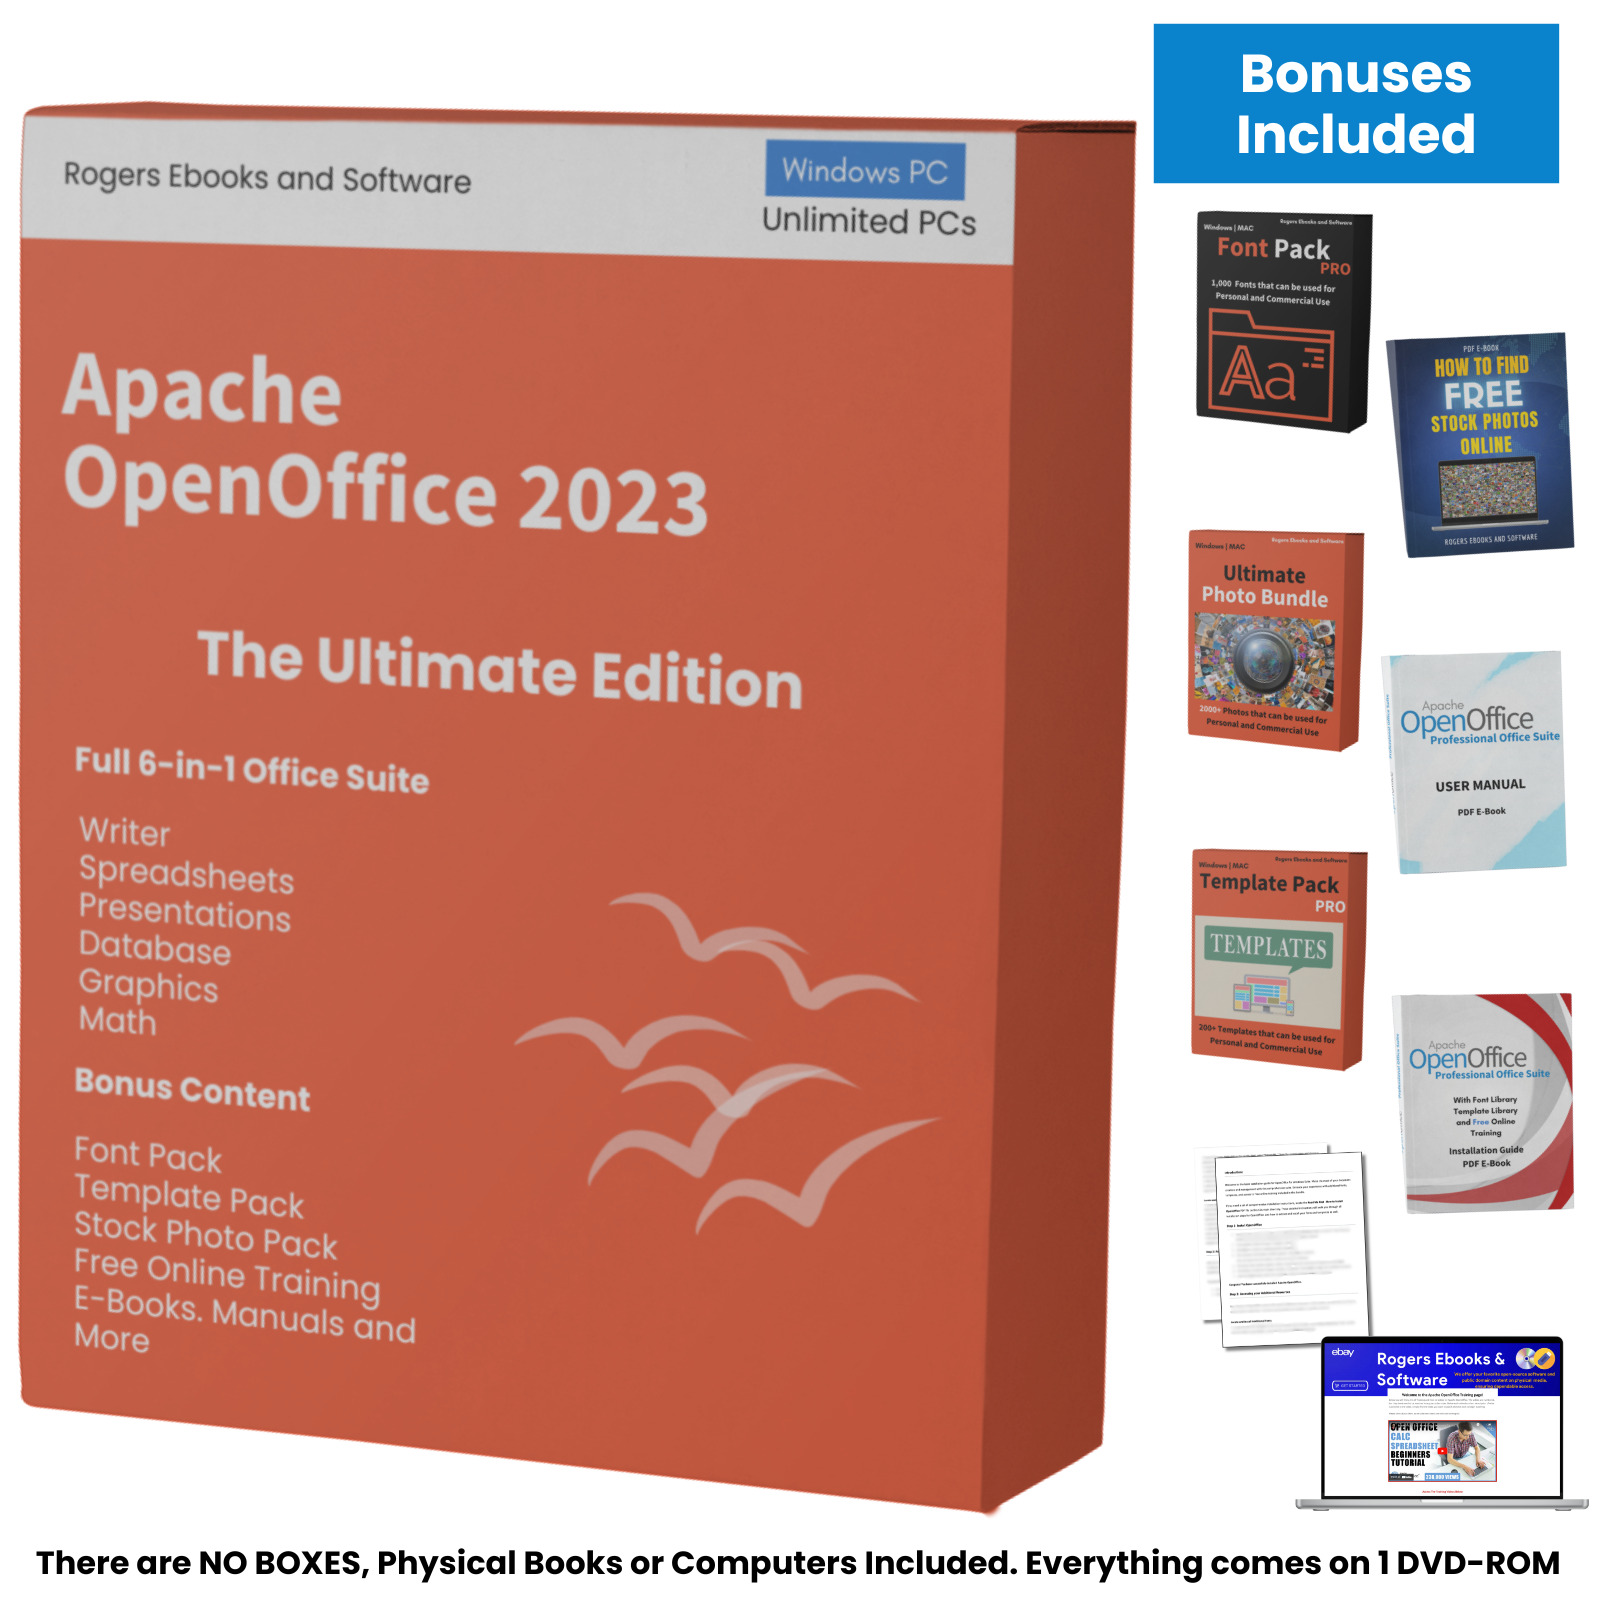 Open Office 2023 Professional Ultimate Full Version DVD Lifetime for Windows PC